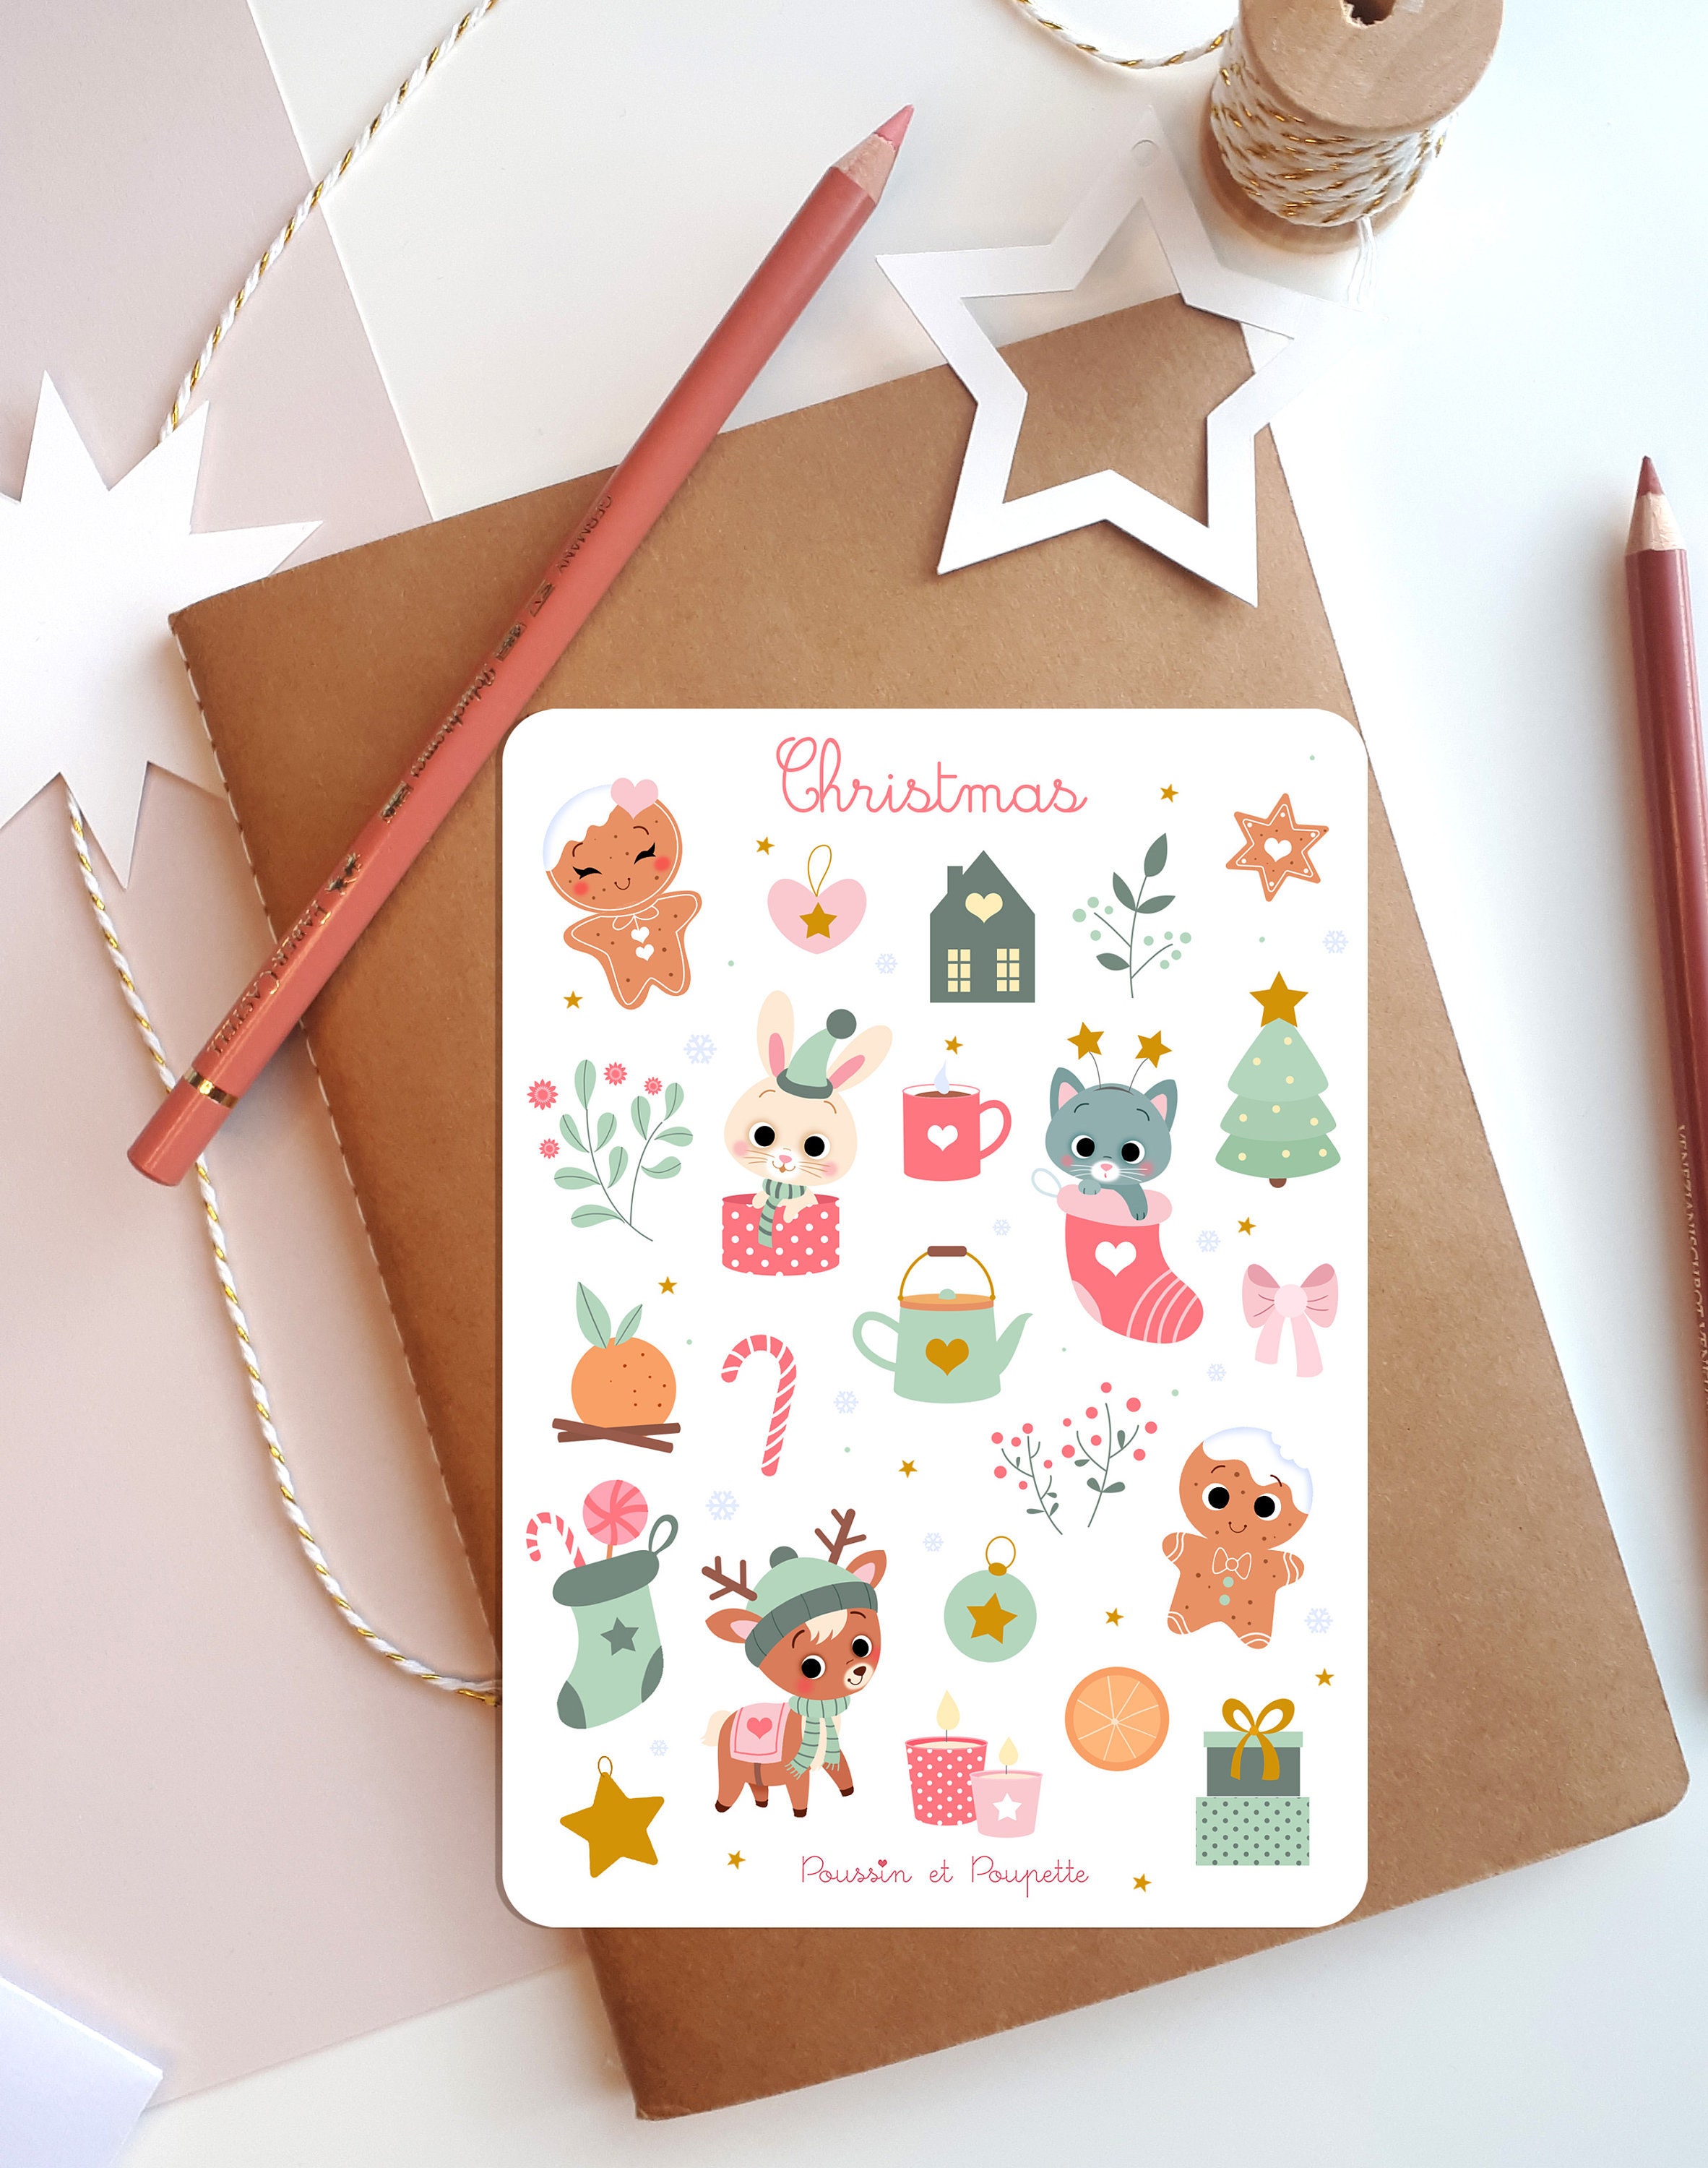 Stickers Bullet Diary Scrapbooking Christmas Stickers Stickers Planner Winter Stickers Christmas Stickers Christmas Stickers